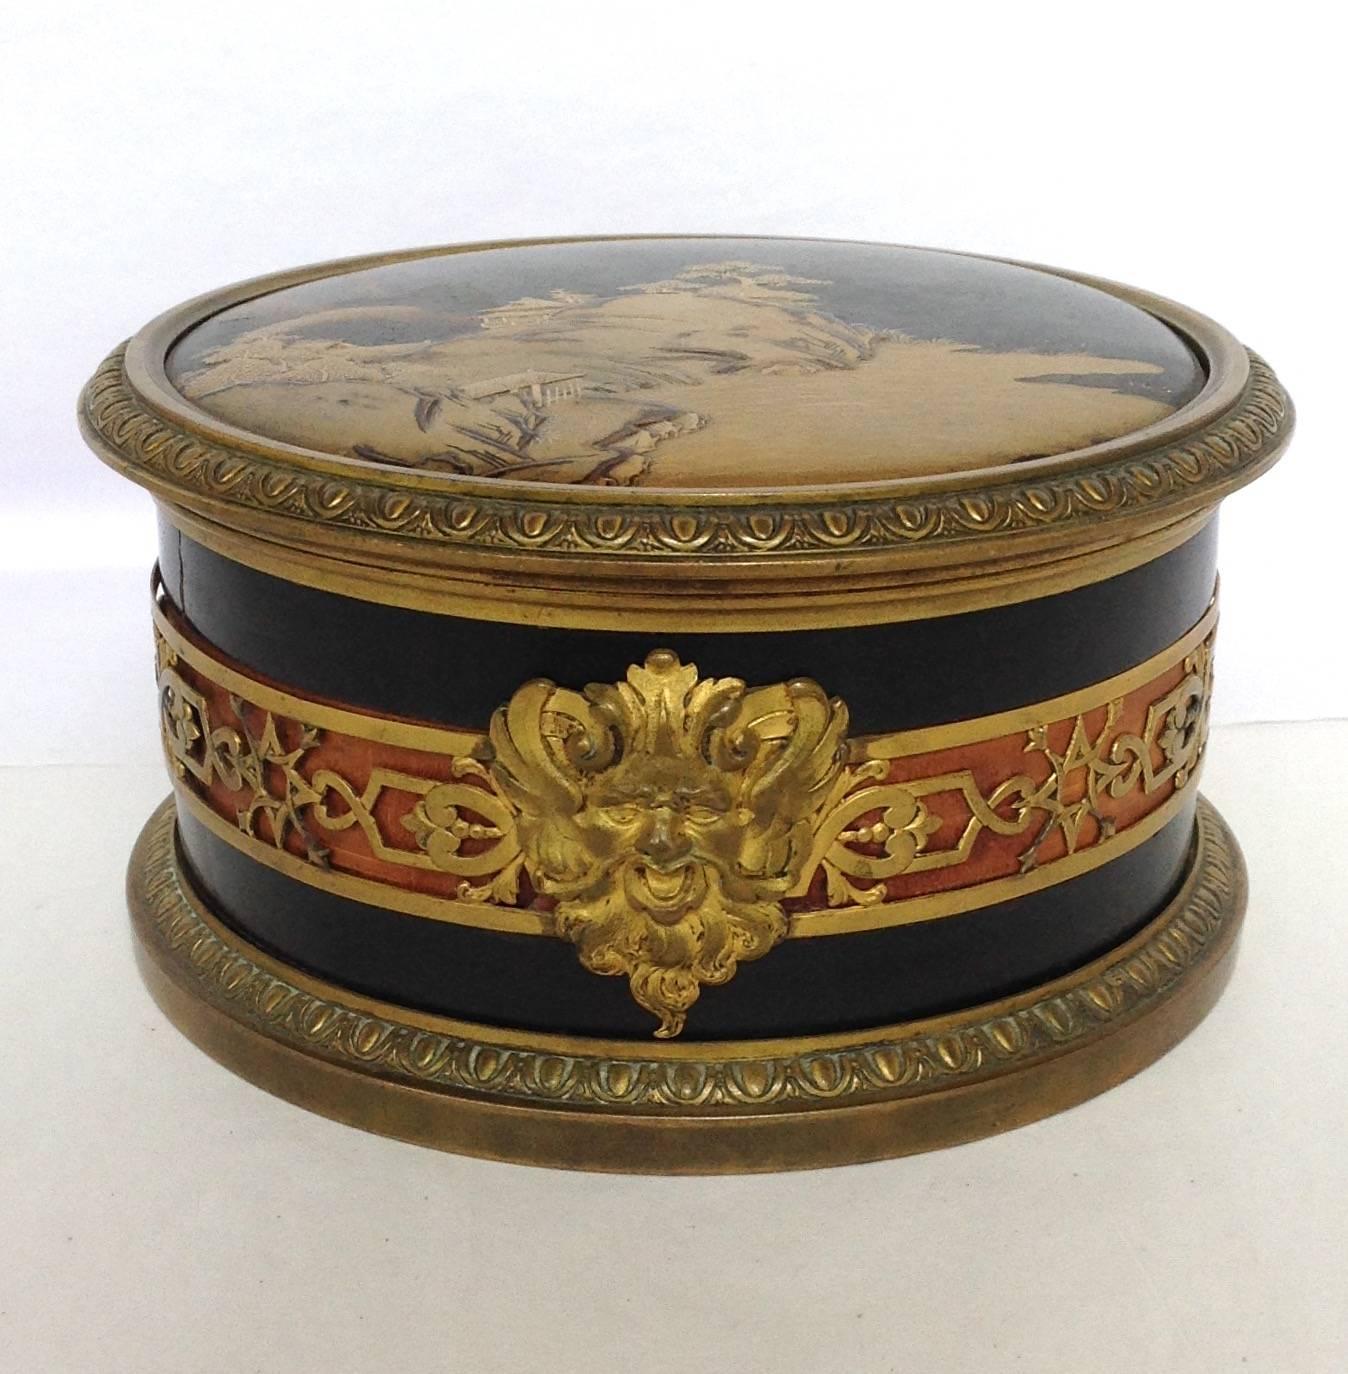 Boin-Taburet French Bronze Box Japanese Lacquer 19th Century In Excellent Condition For Sale In Houston, TX